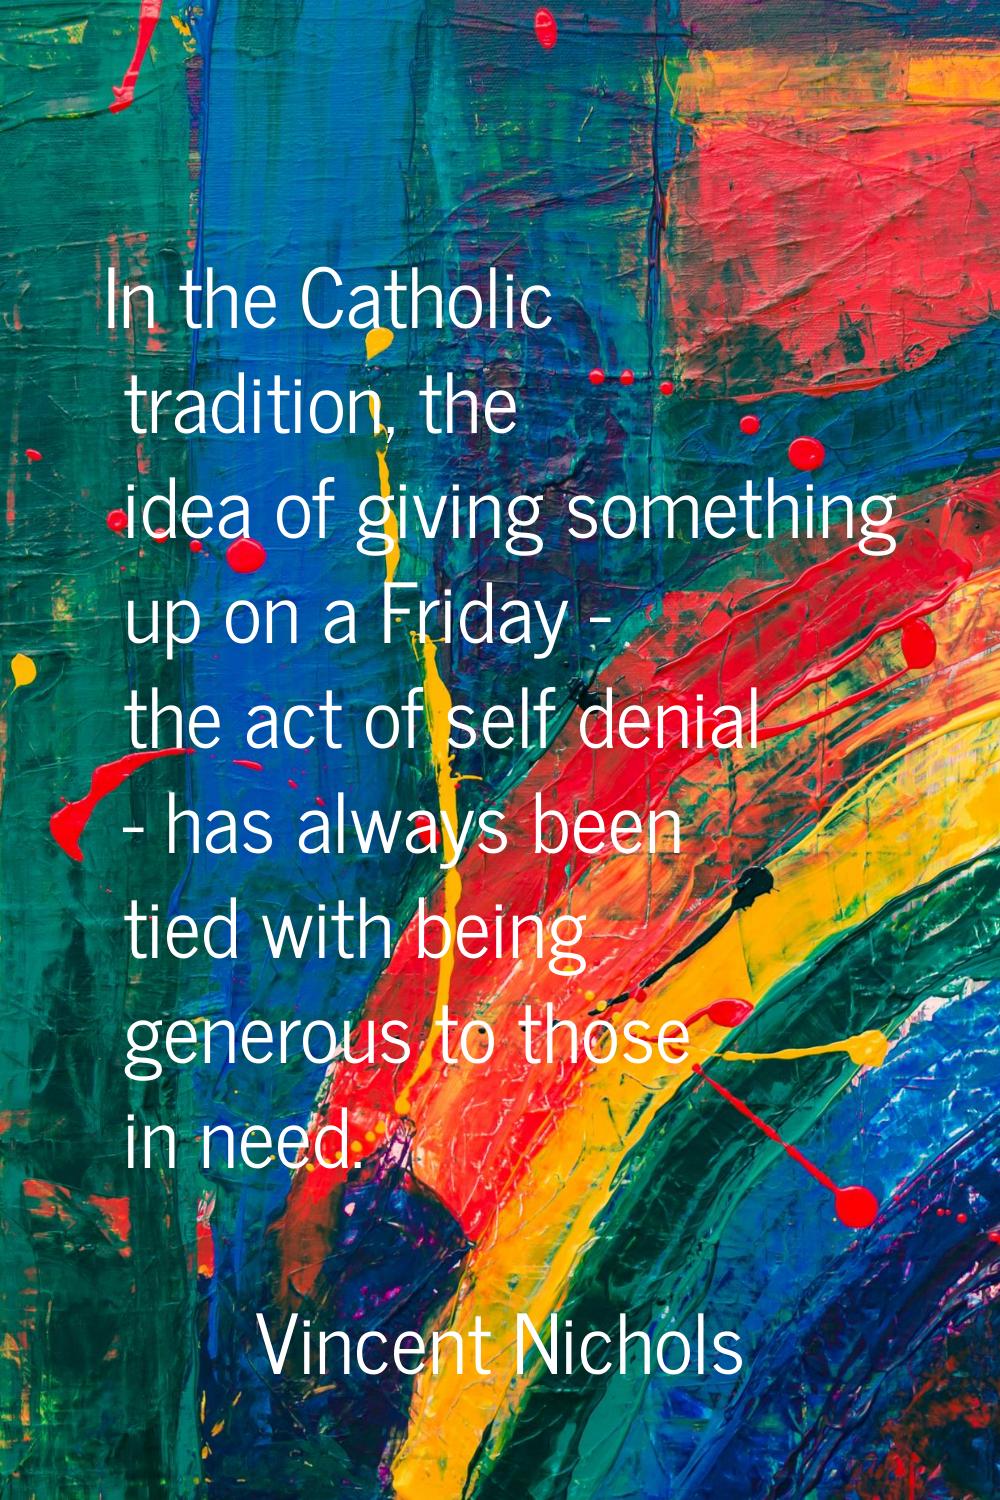 In the Catholic tradition, the idea of giving something up on a Friday - the act of self denial - h